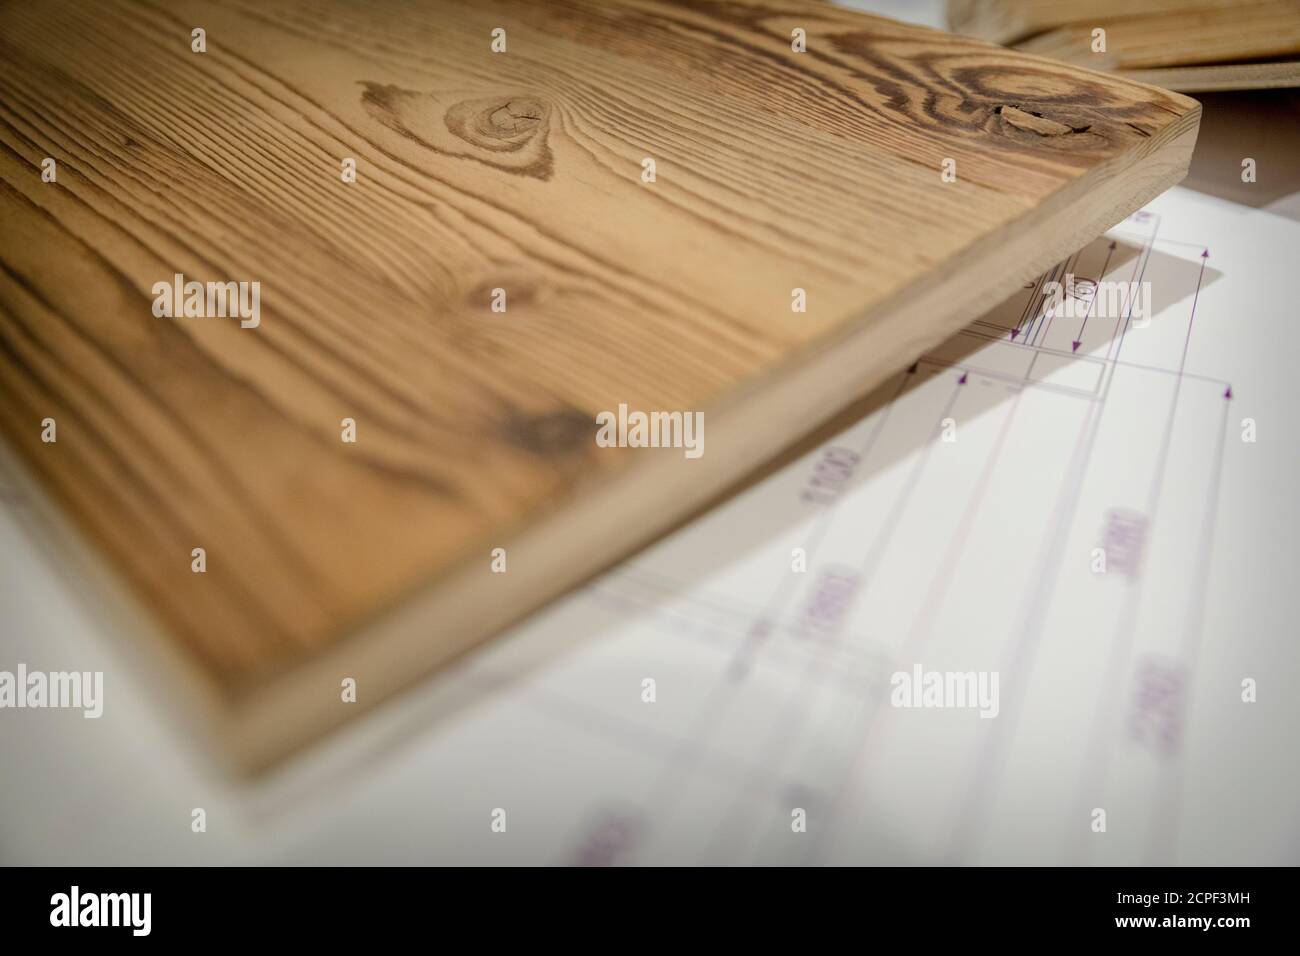 carpentry, wooden furniture, technical drawing and samples of different types of wood under a desk Stock Photo